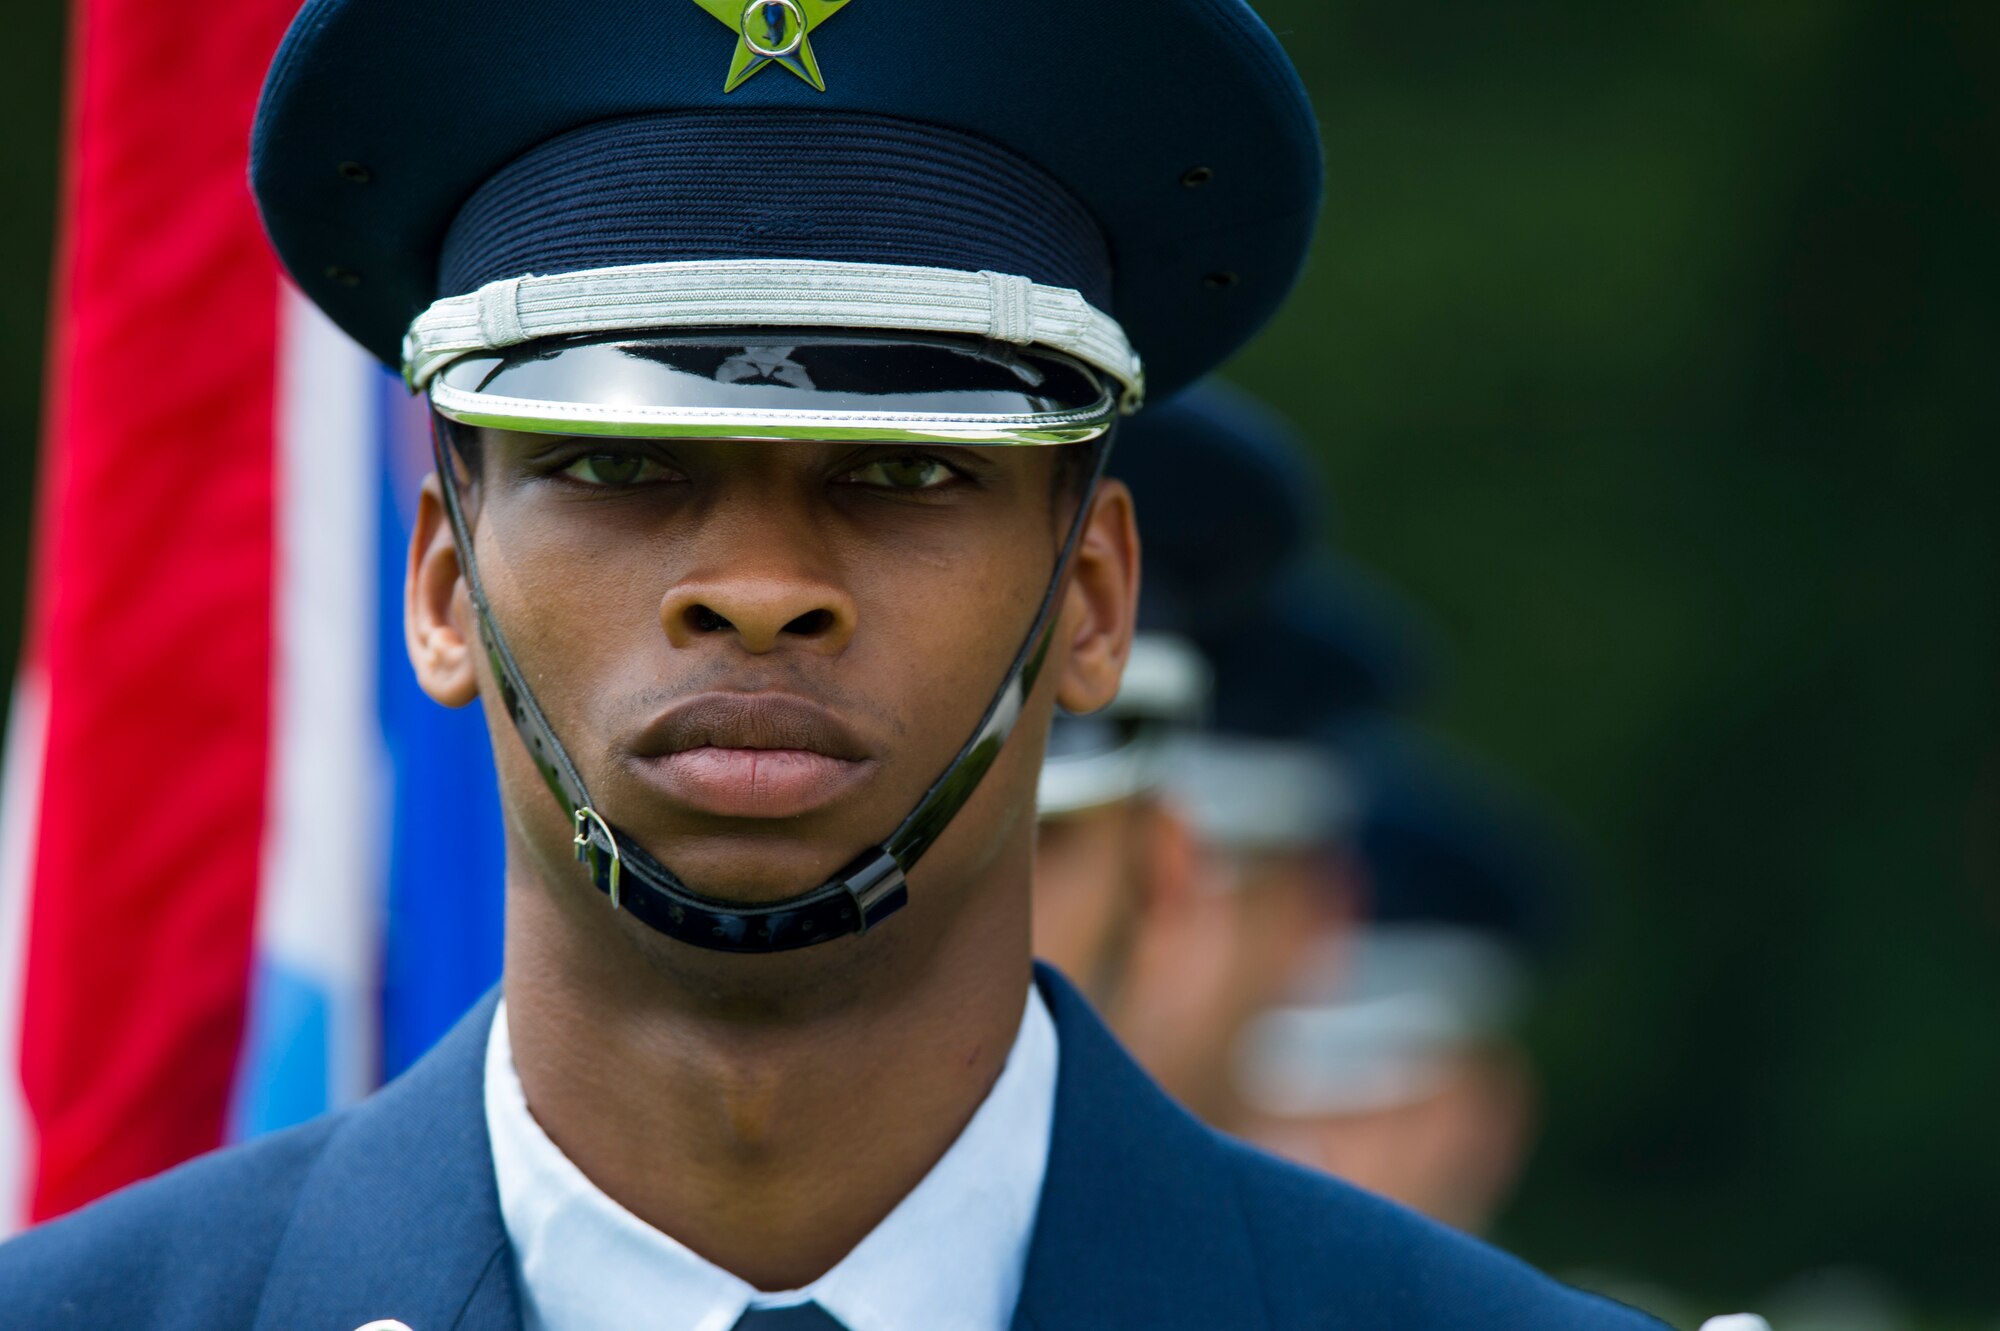 U.S. Air Force Airman 1st Class Jeffery Stewart, a Spangdahlem Air Base Ceremonial Guardsman, stands at parade rest before his detail presents the colors as part of a Memorial Day ceremony at the Luxembourg American Cemetery and Memorial in Luxembourg, May 28, 2016. Airmen from Spangdahlem Air Base, Germany, served as a ceremonial flight in service dress, caretakers of the cemetery's Luxembourg and U.S. flags, and escorts for guests to lay wreaths. (U.S. Air Force photo by Staff Sgt. Joe W. McFadden/Released)  